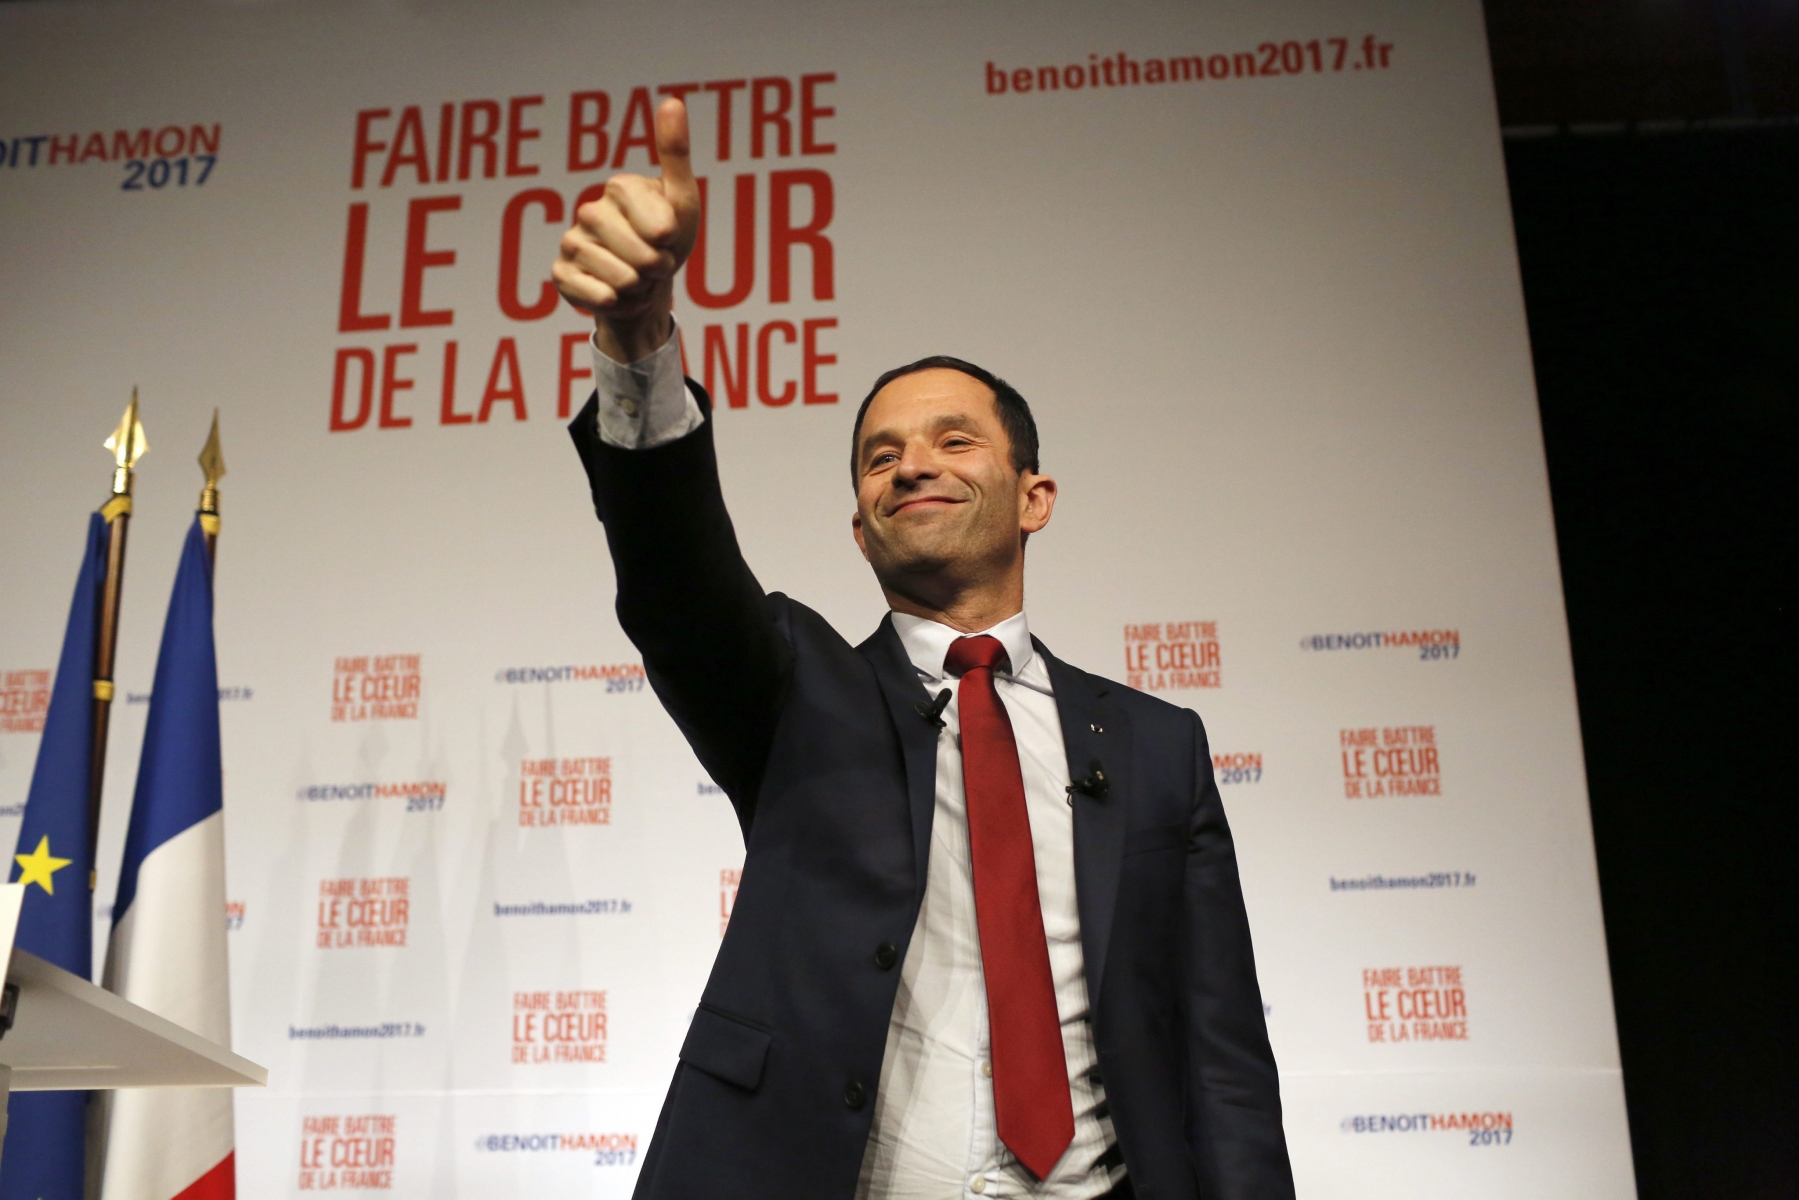 epa05755244 French former education minister Benoit Hamon waves during his meeting before the second round of the left-wing party primaries in Lille, France, 27 January 2017. Former education minister Benoit Hamon will take on former prime minister Manuel Valls in a left-wing parties primaries run-off vote on 29 January 2017.  EPA/THIBAULT VANDERMERSCH FRANCE ELECTIONS LEFT WING PRIMARIES